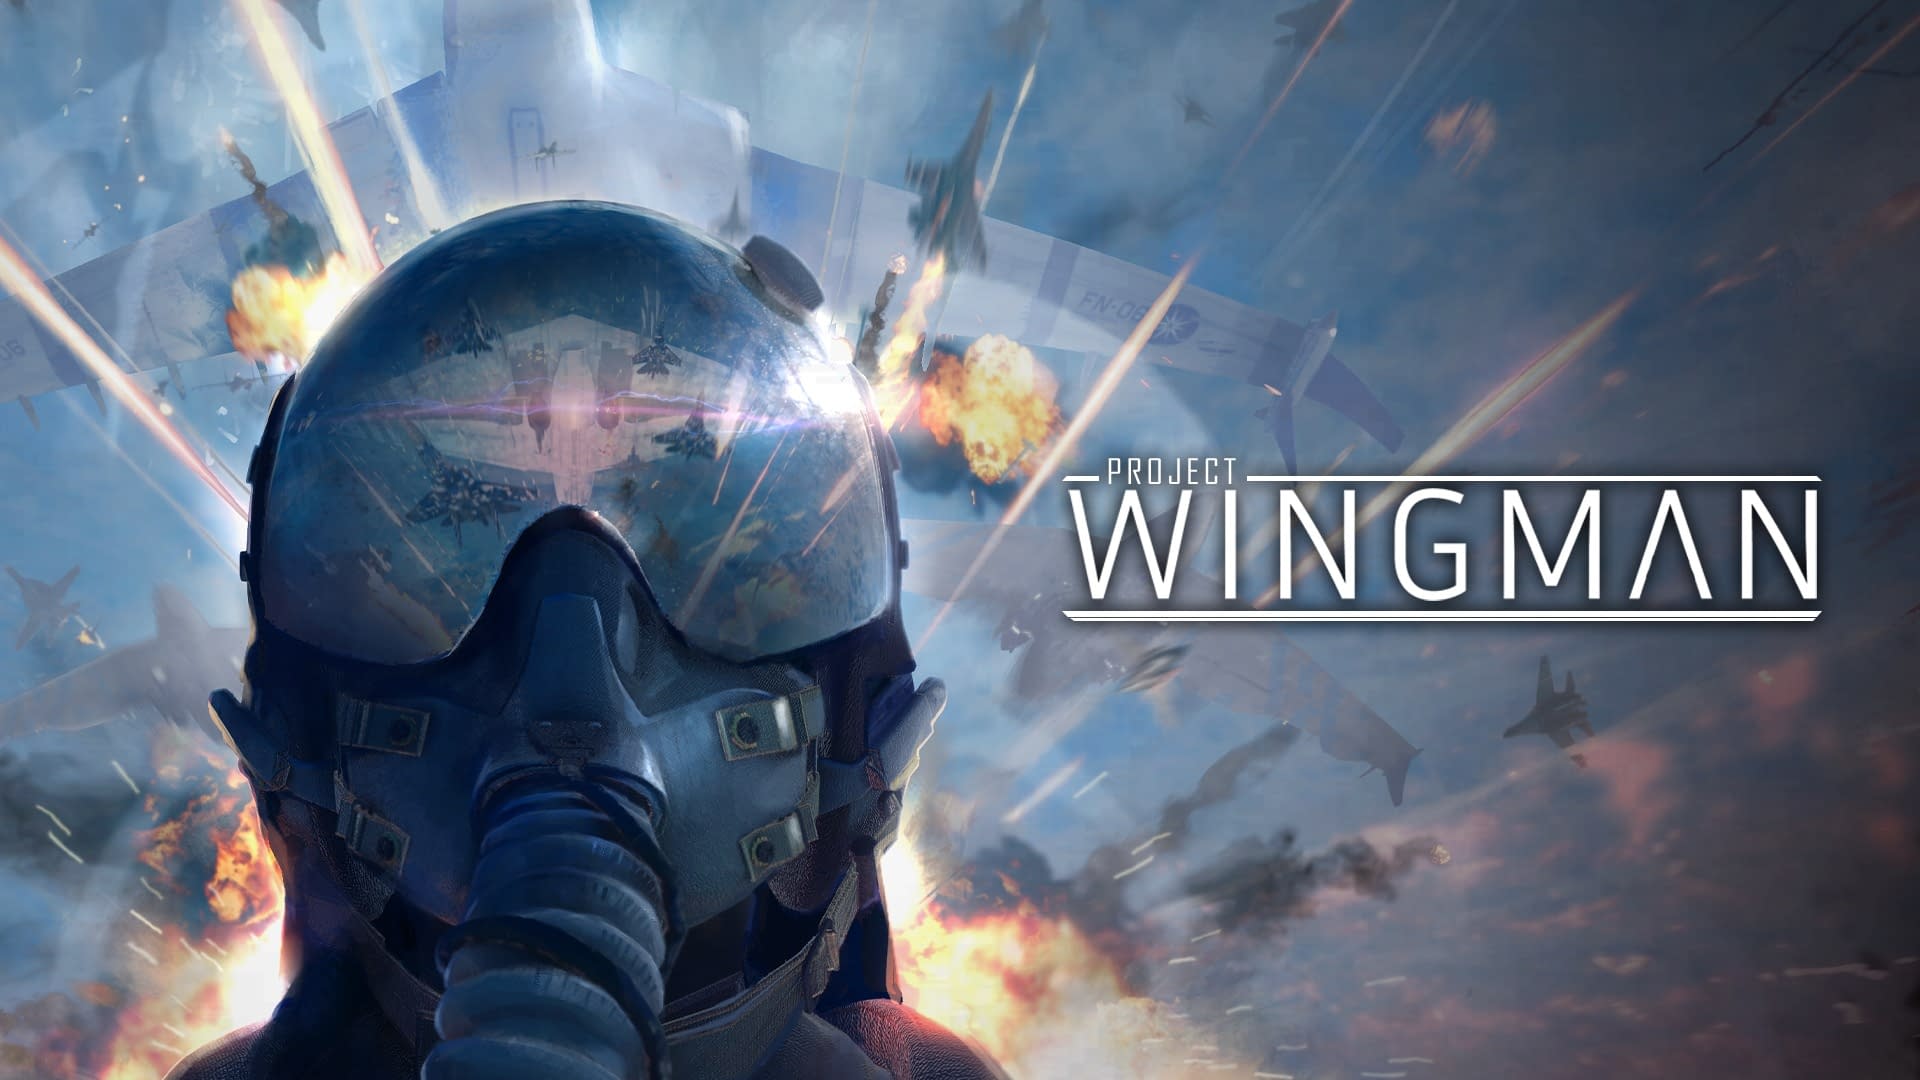 Get Ready for Flight Experience in VR Titles: Project Wingman Comes